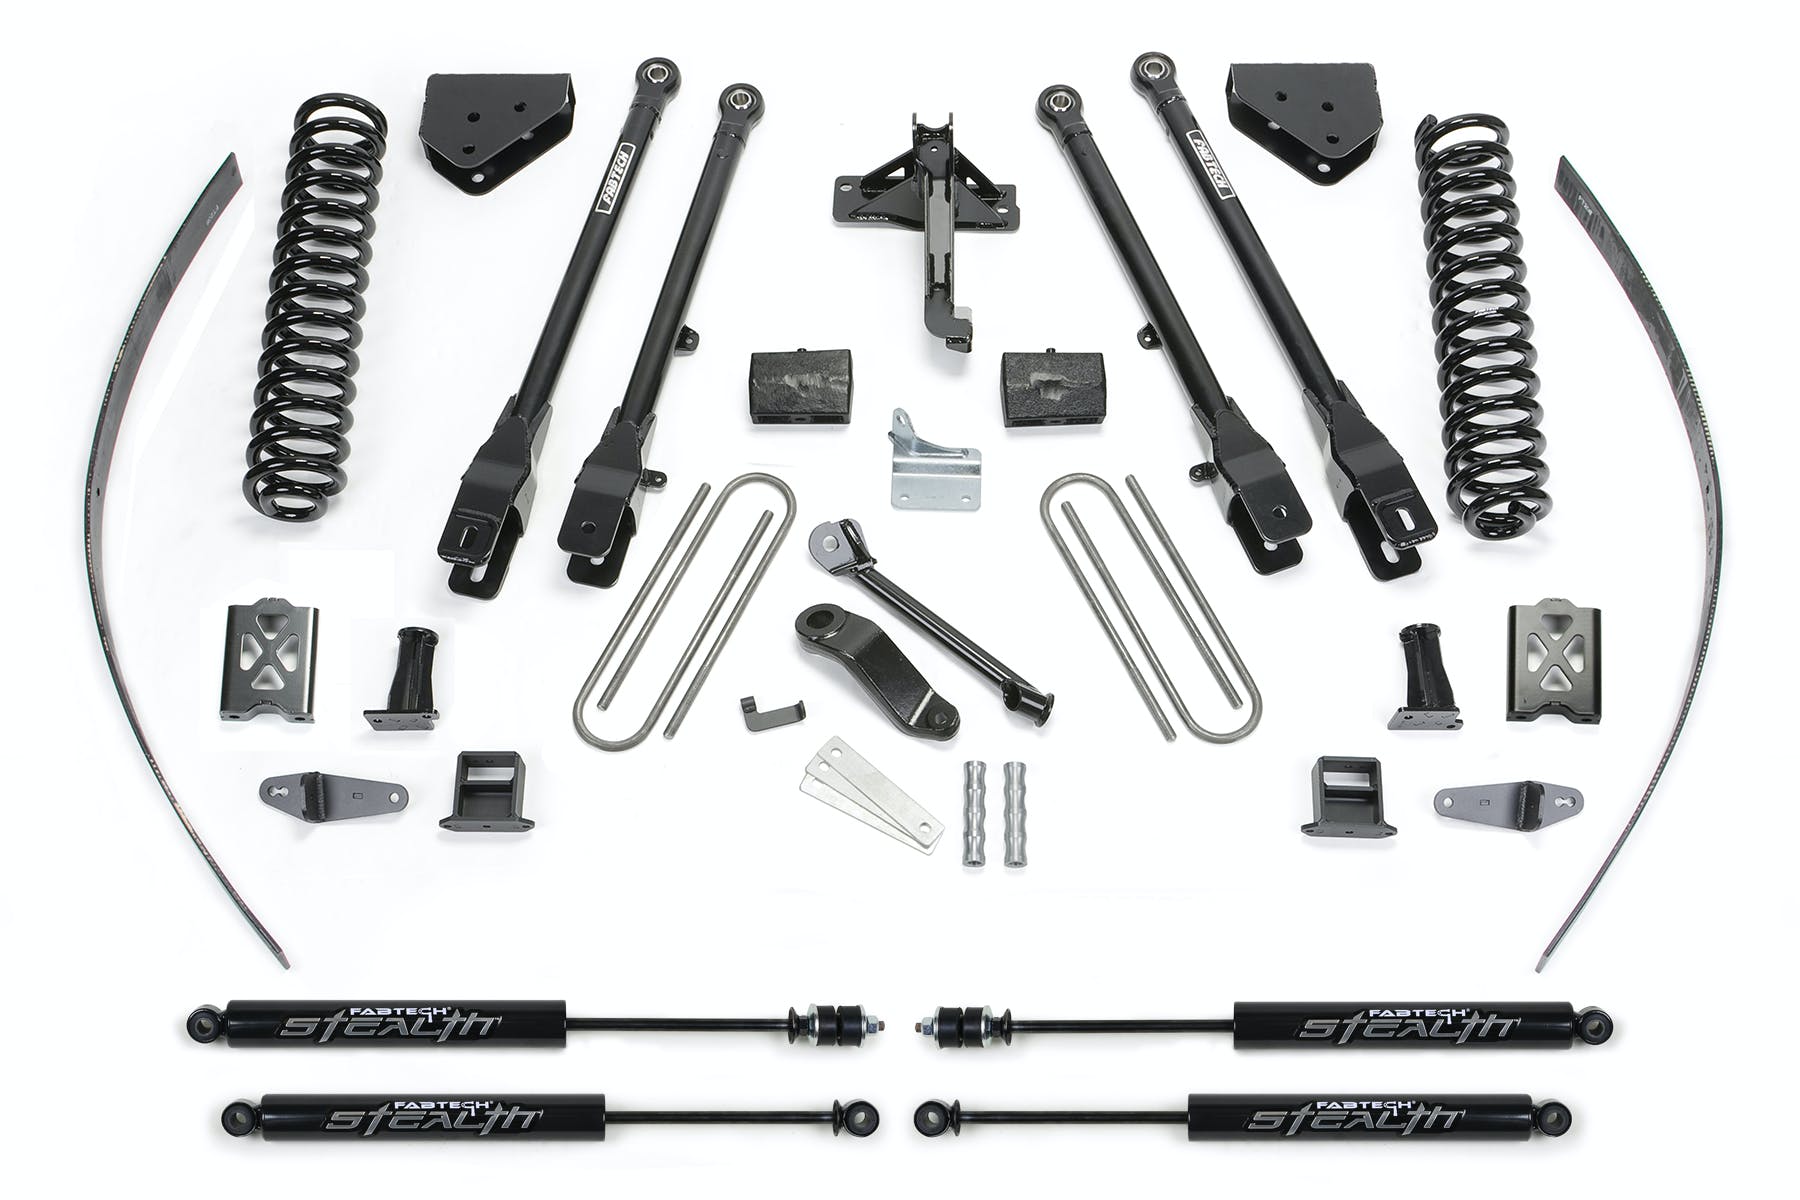 Fabtech K20171M 8in. 4LINK SYS W/COILS/STEALTH 05-07 FORD F250 4WD W/FACTORY OVERLOAD